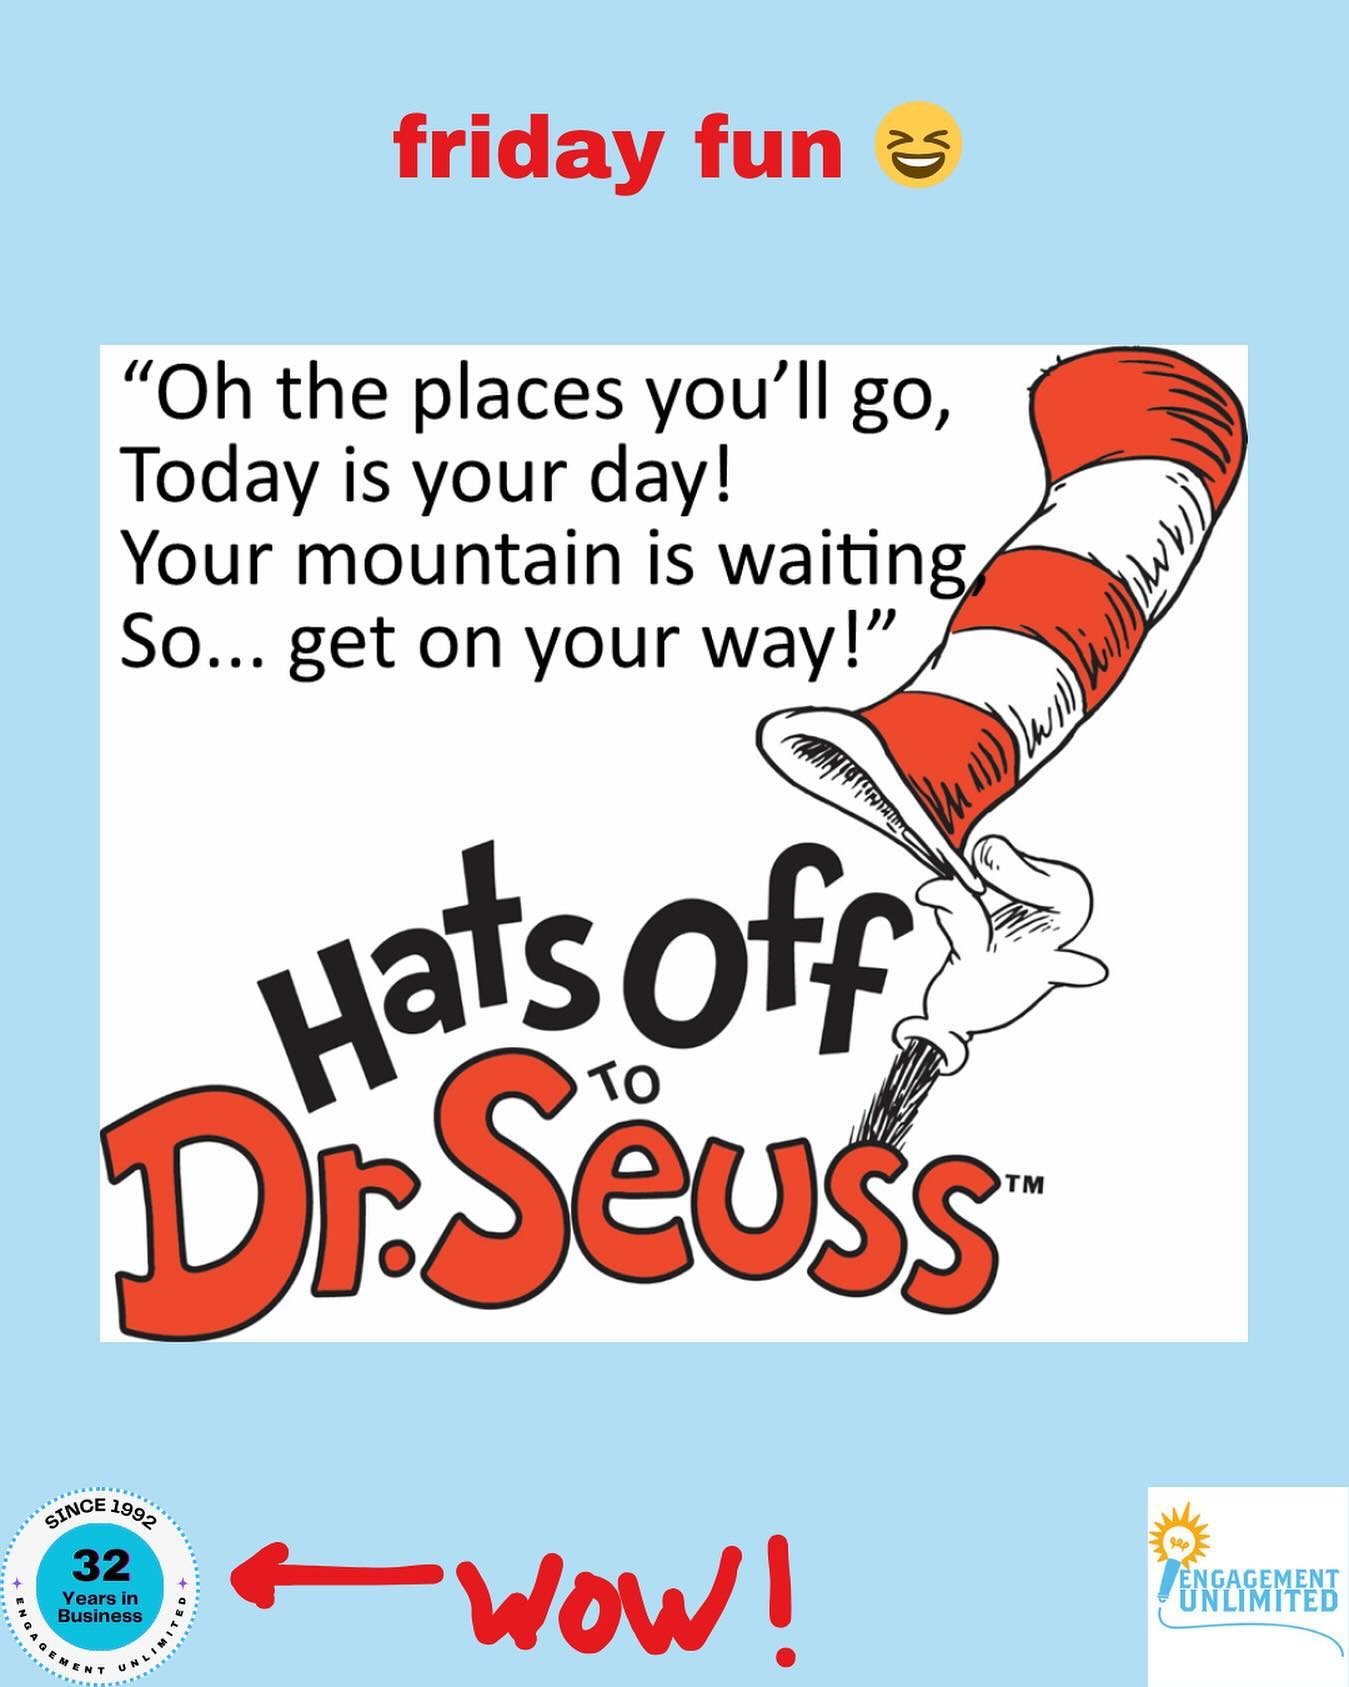 Friday fun thanks to Dr. Seuss :)

Engagement Unlimited where ENGAGEMENT meets FUN